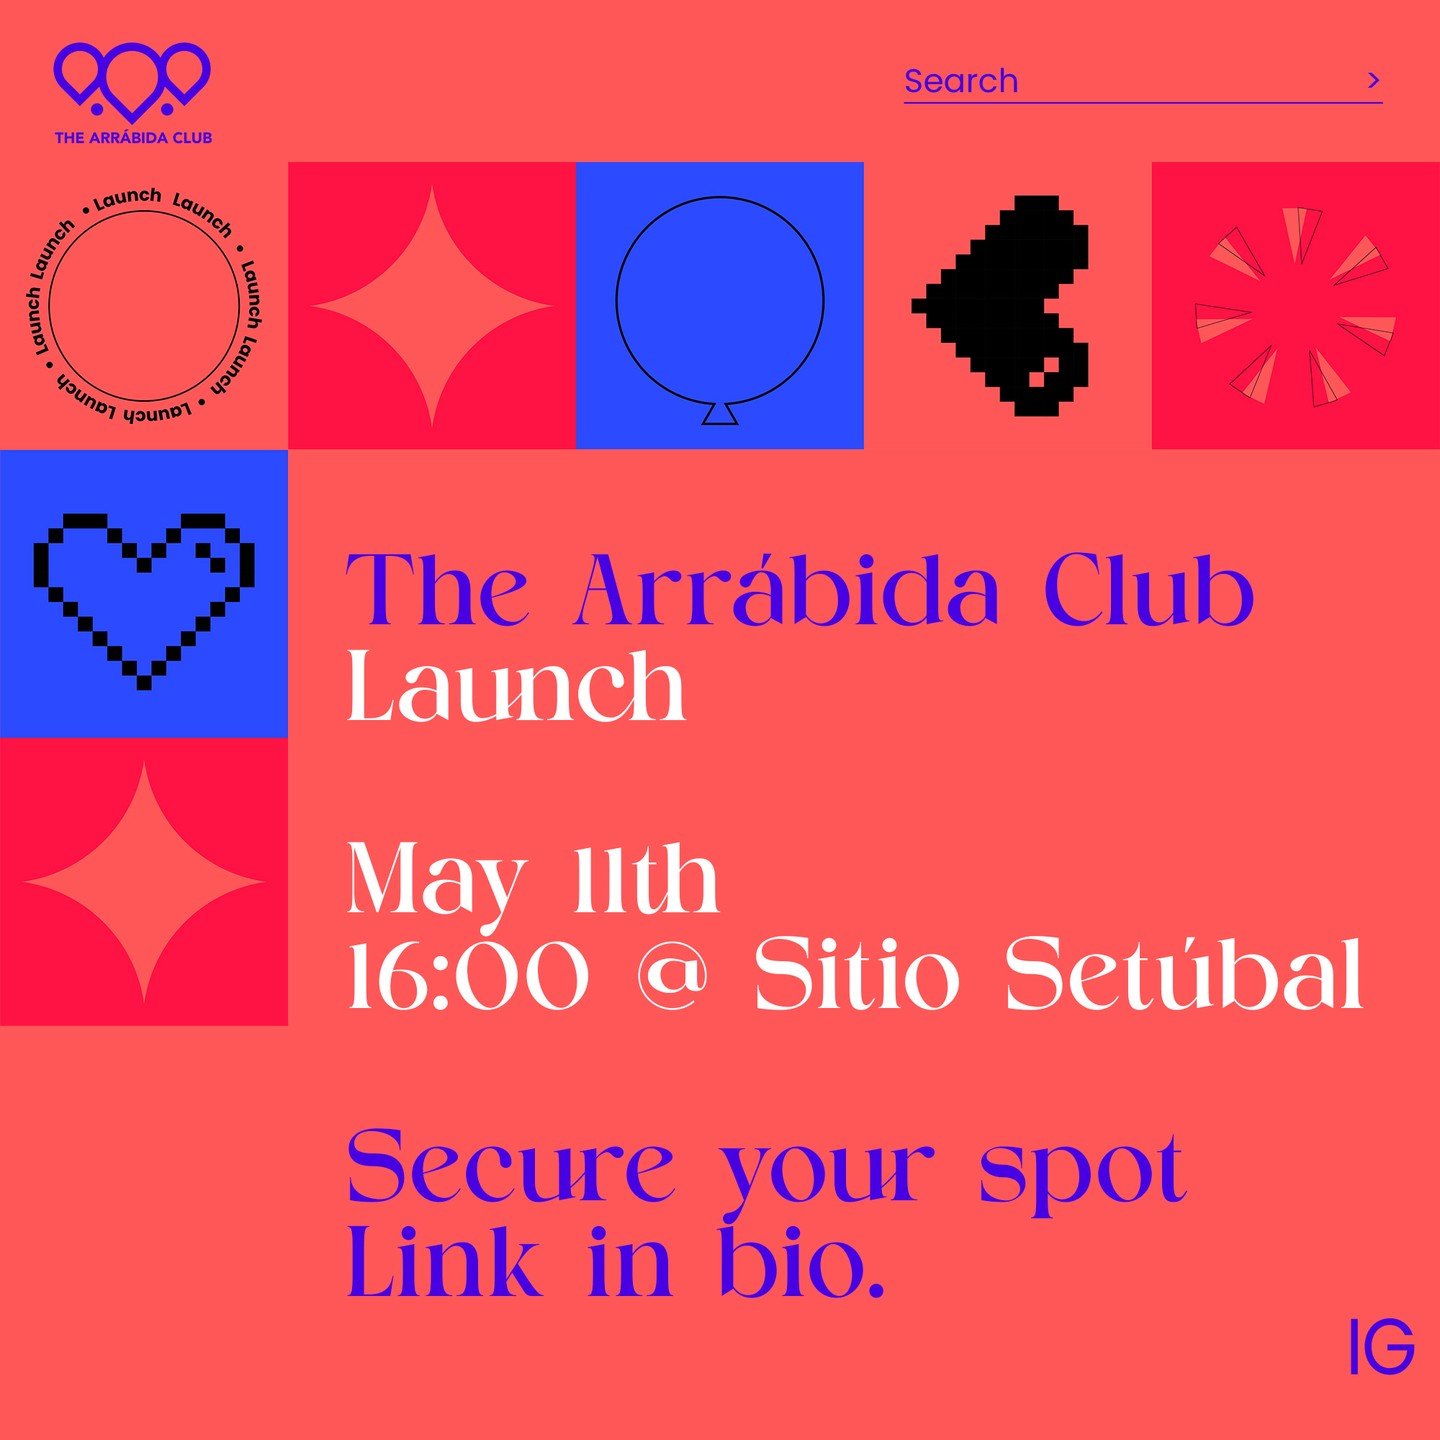 The official launch of The Arr&aacute;bida Club is set for May 11th at 16:00 @SitioSet&uacute;bal. Join us to celebrate our launch to mark the beginning of a one stop entrepreneurial social club for: Networking, Professional development, Workshops, I